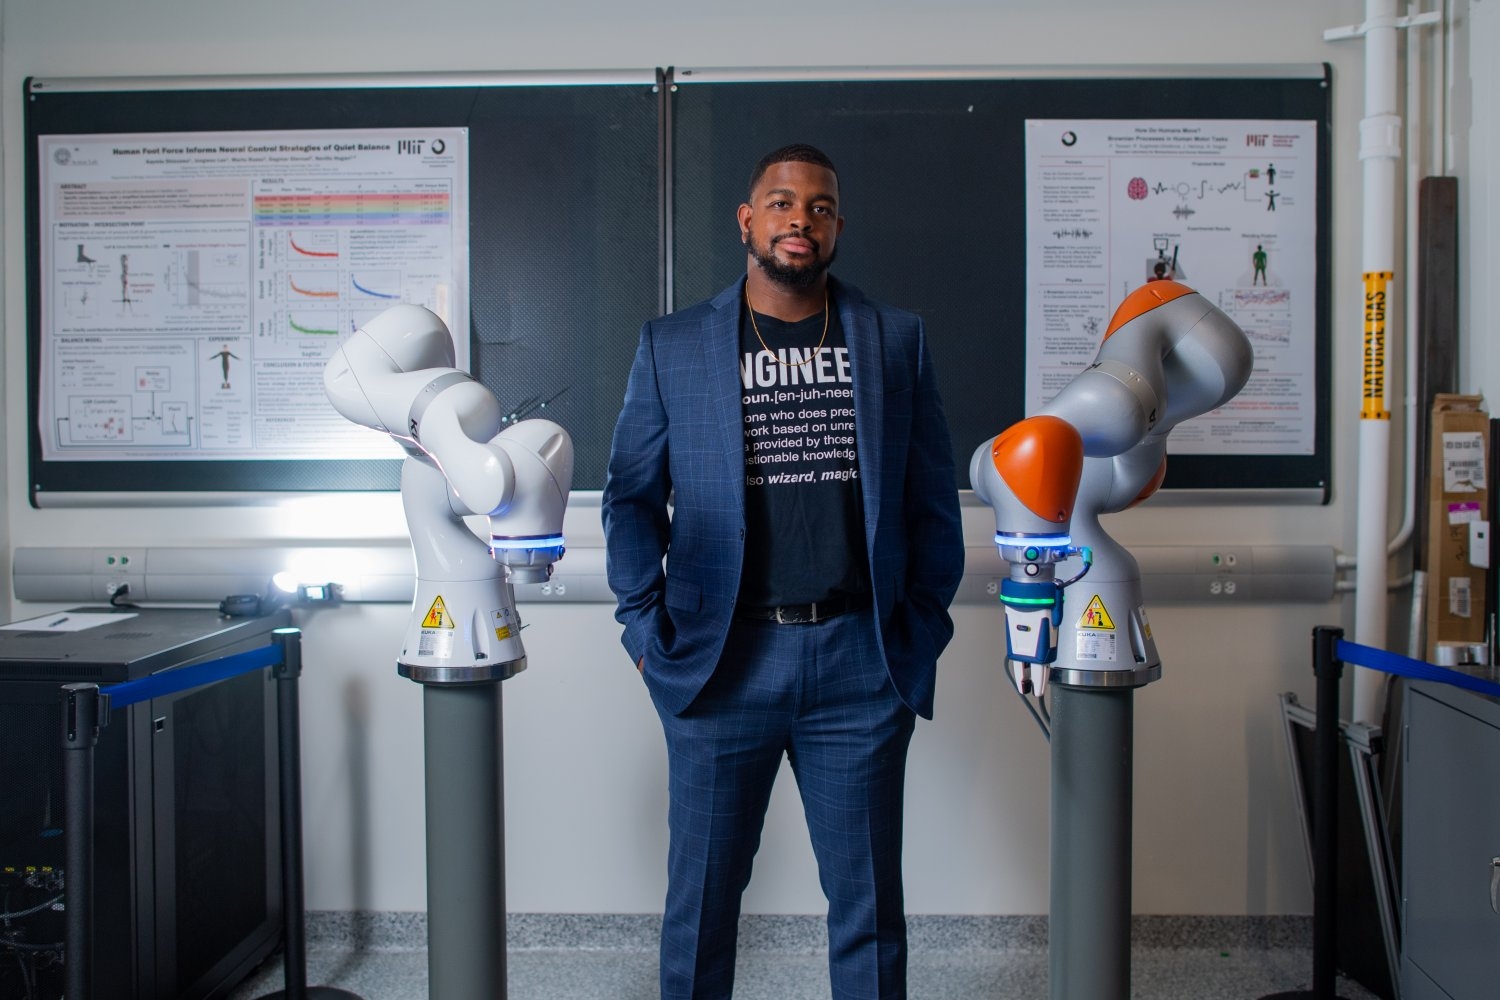 A. Michael West's path as an engineer studying health-care robotics has been shaped by programs including the MIT Summer Research Program (MSRP), the MIT-Takeda Program, and the MIT and Accenture Convergence Initiative for Industry and Technology.